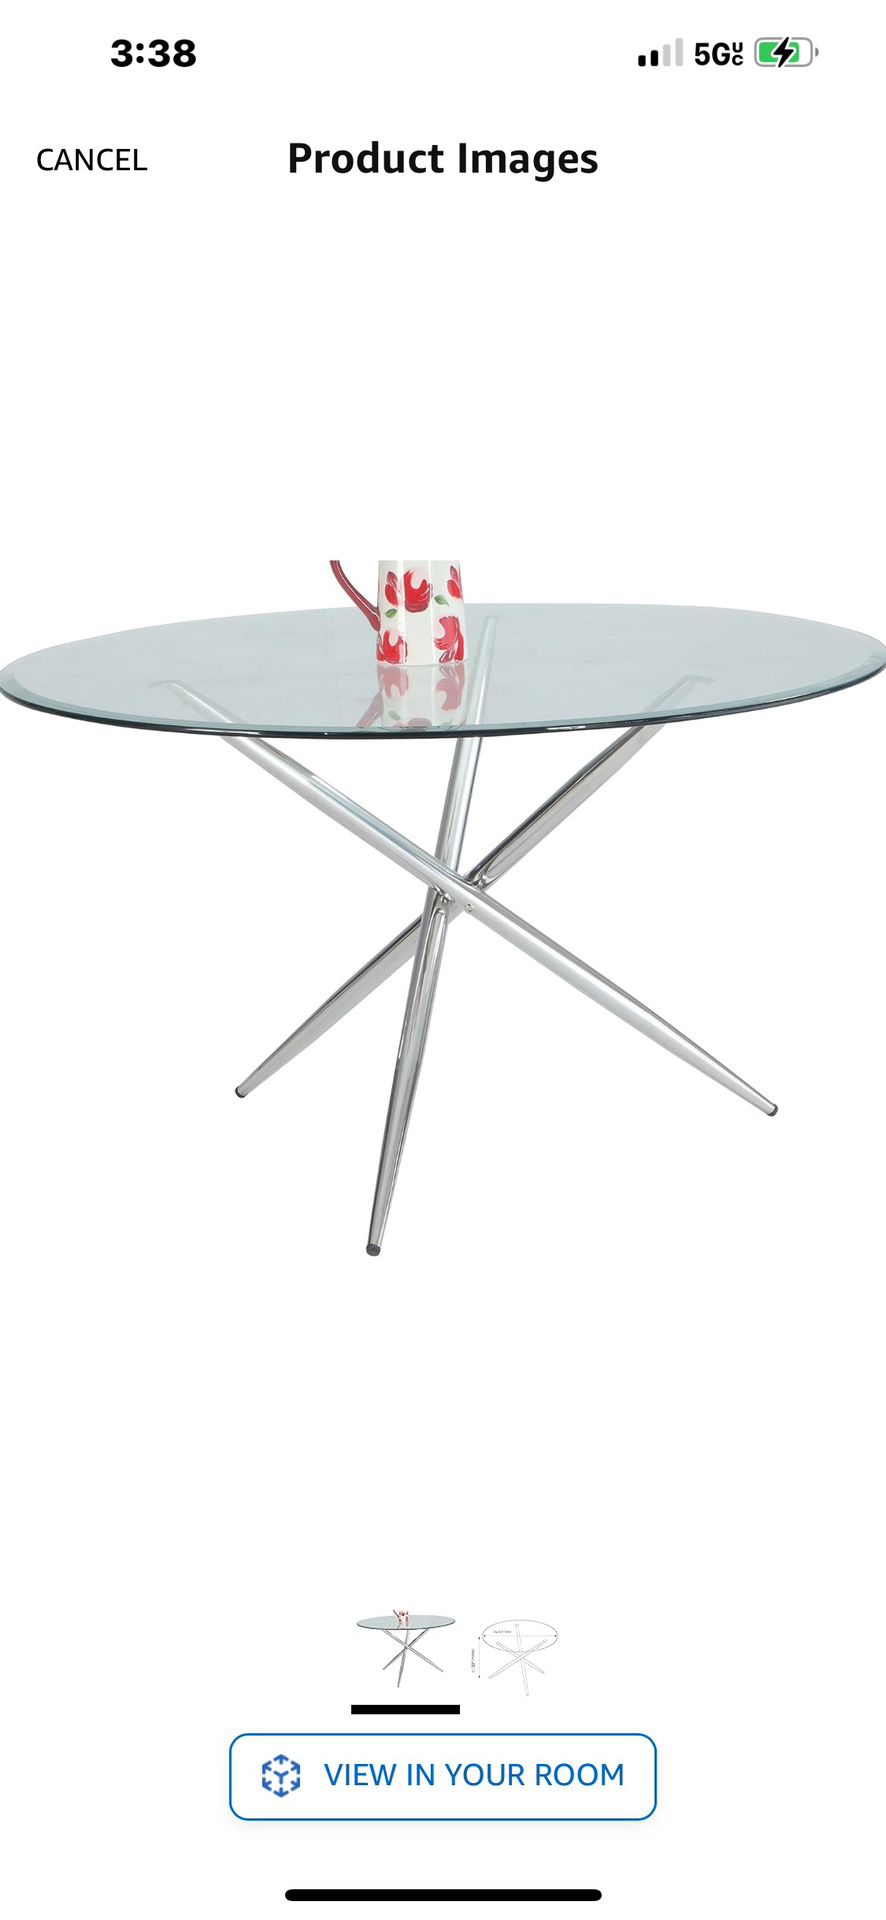 Milan Patience Round Glass Dining Table